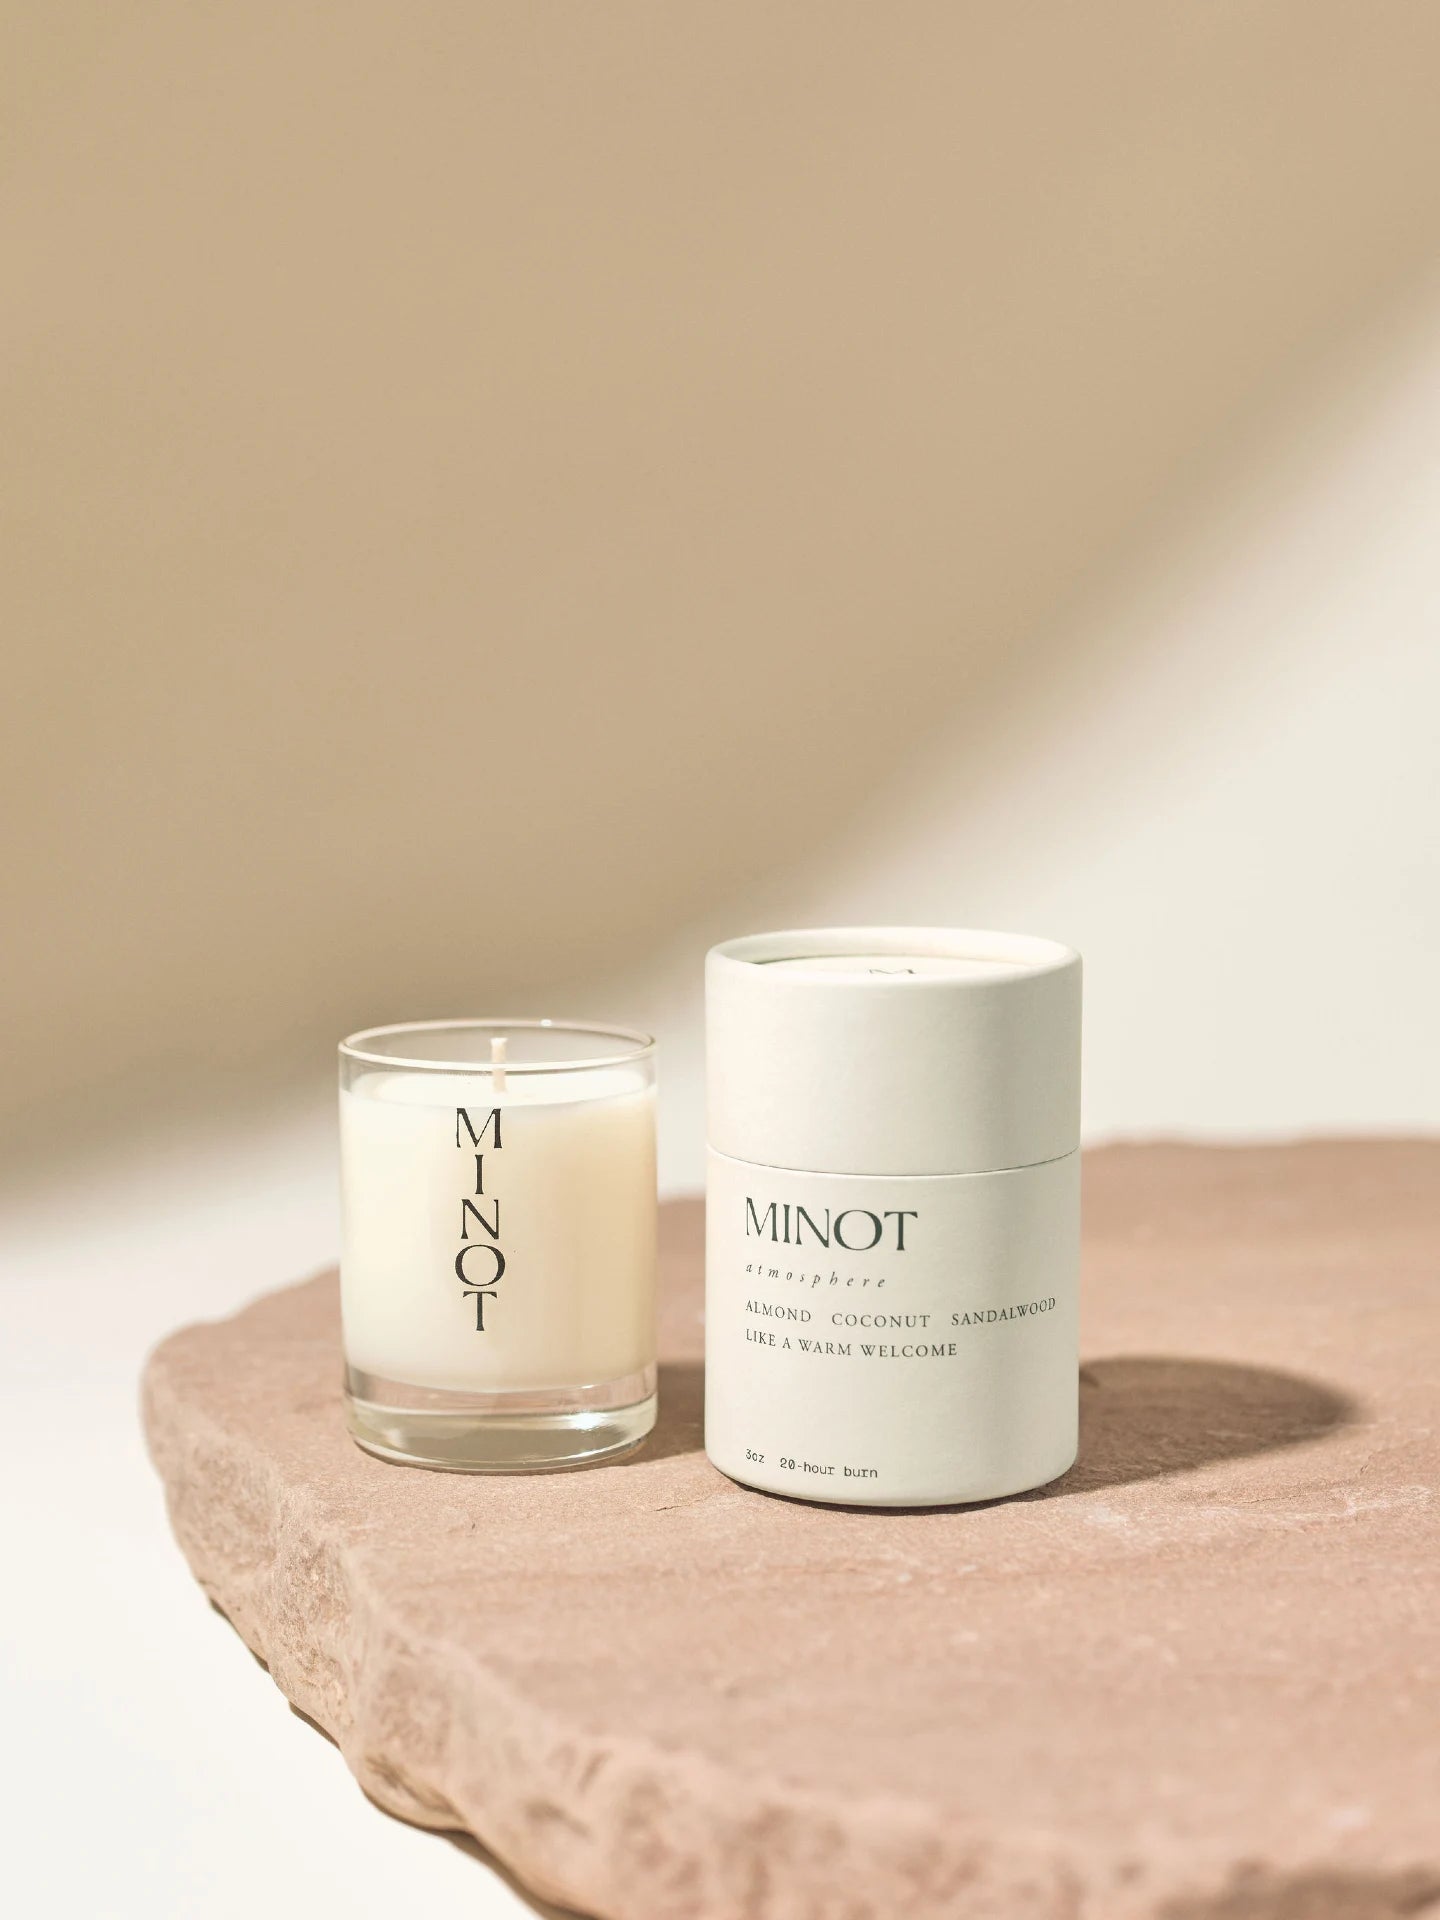 The hormone-friendly Atmosphere Mini is a small, clean-burning candle with a soothing almond scent